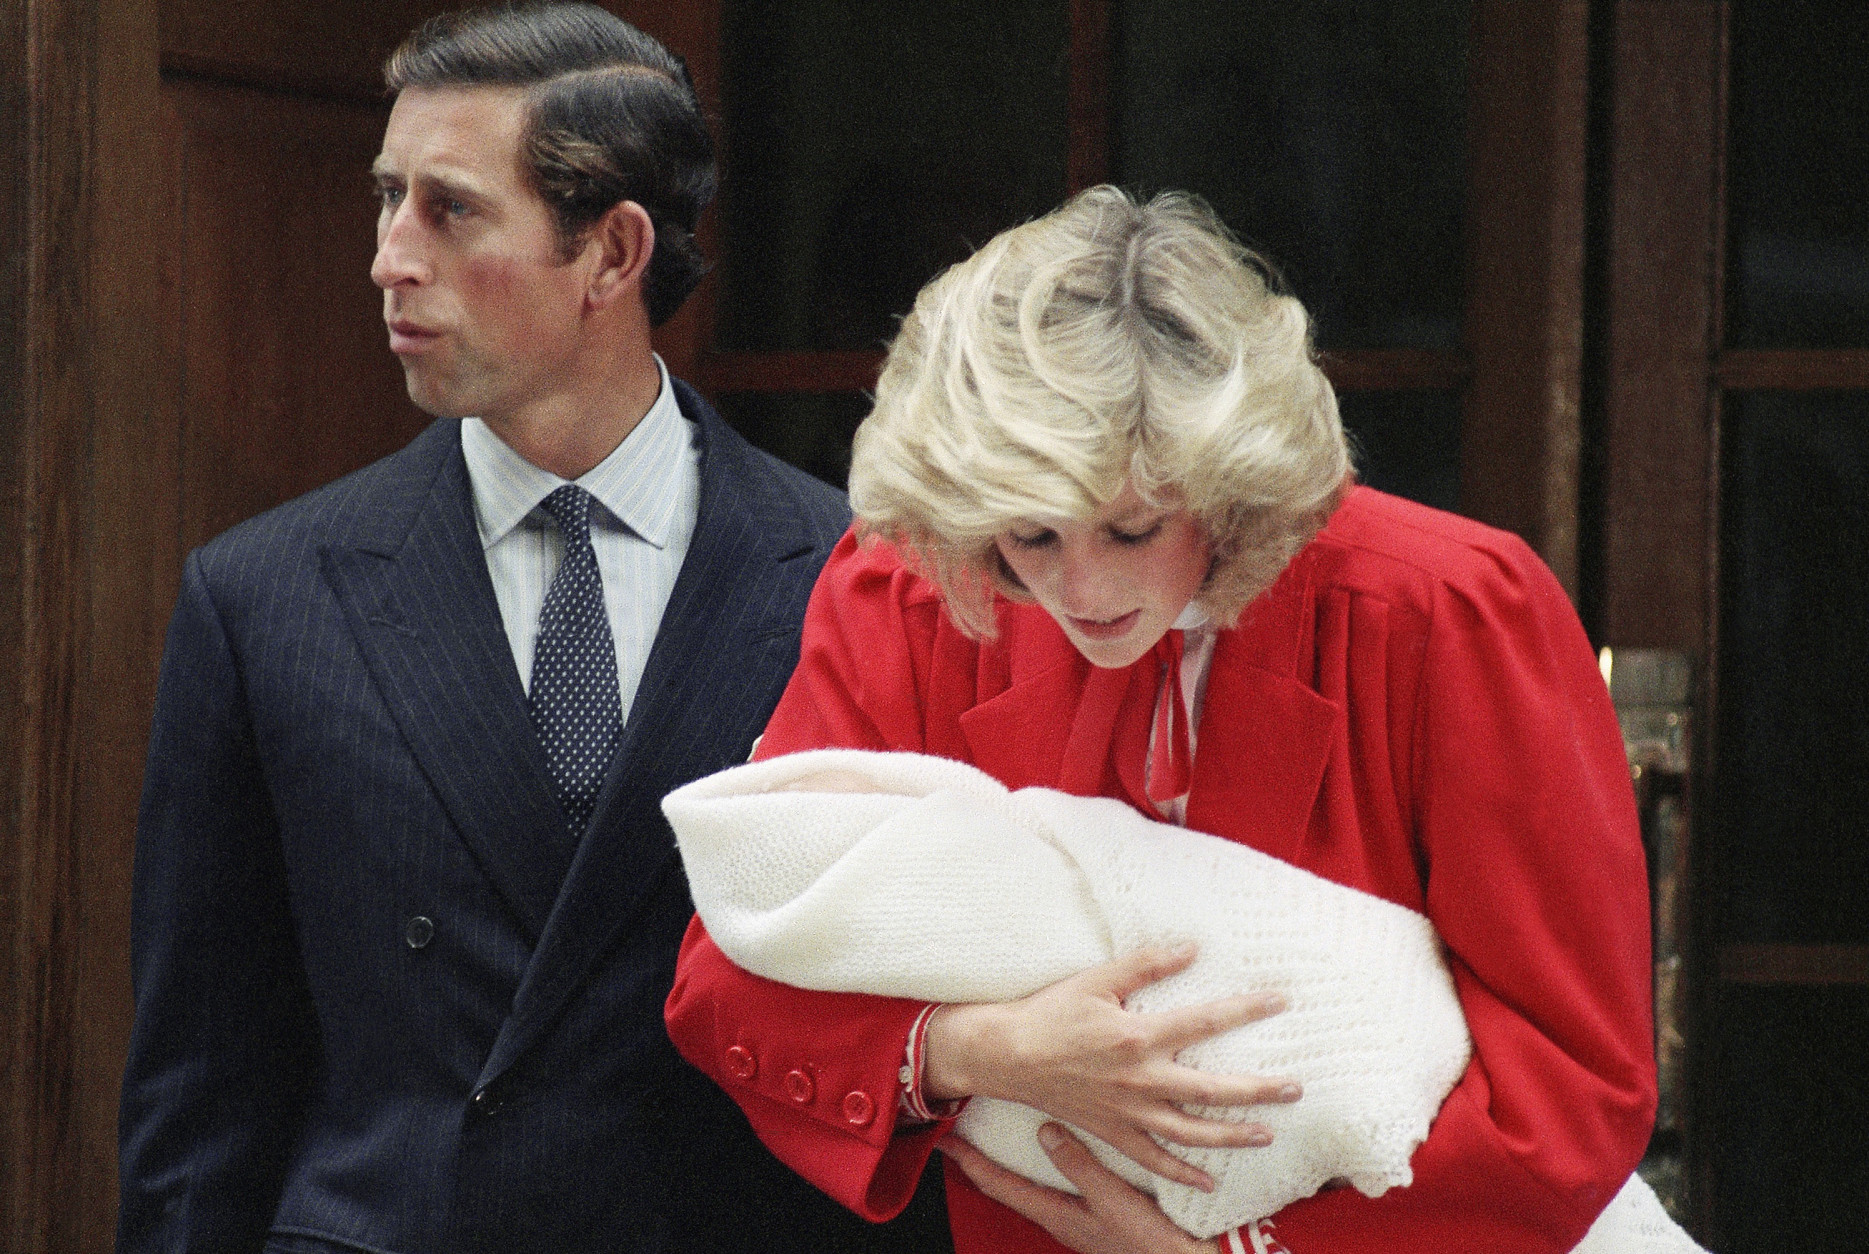 FILE -- The Prince and Princess of Wales, Prince Charles and Princess Diana leave St. Mary's Hospital in Paddington, London with their new baby son on Sept. 16, 1984.    Princess Diana carries new baby,  Prince Harry who was born on Sept. 15.    (AP Photo)